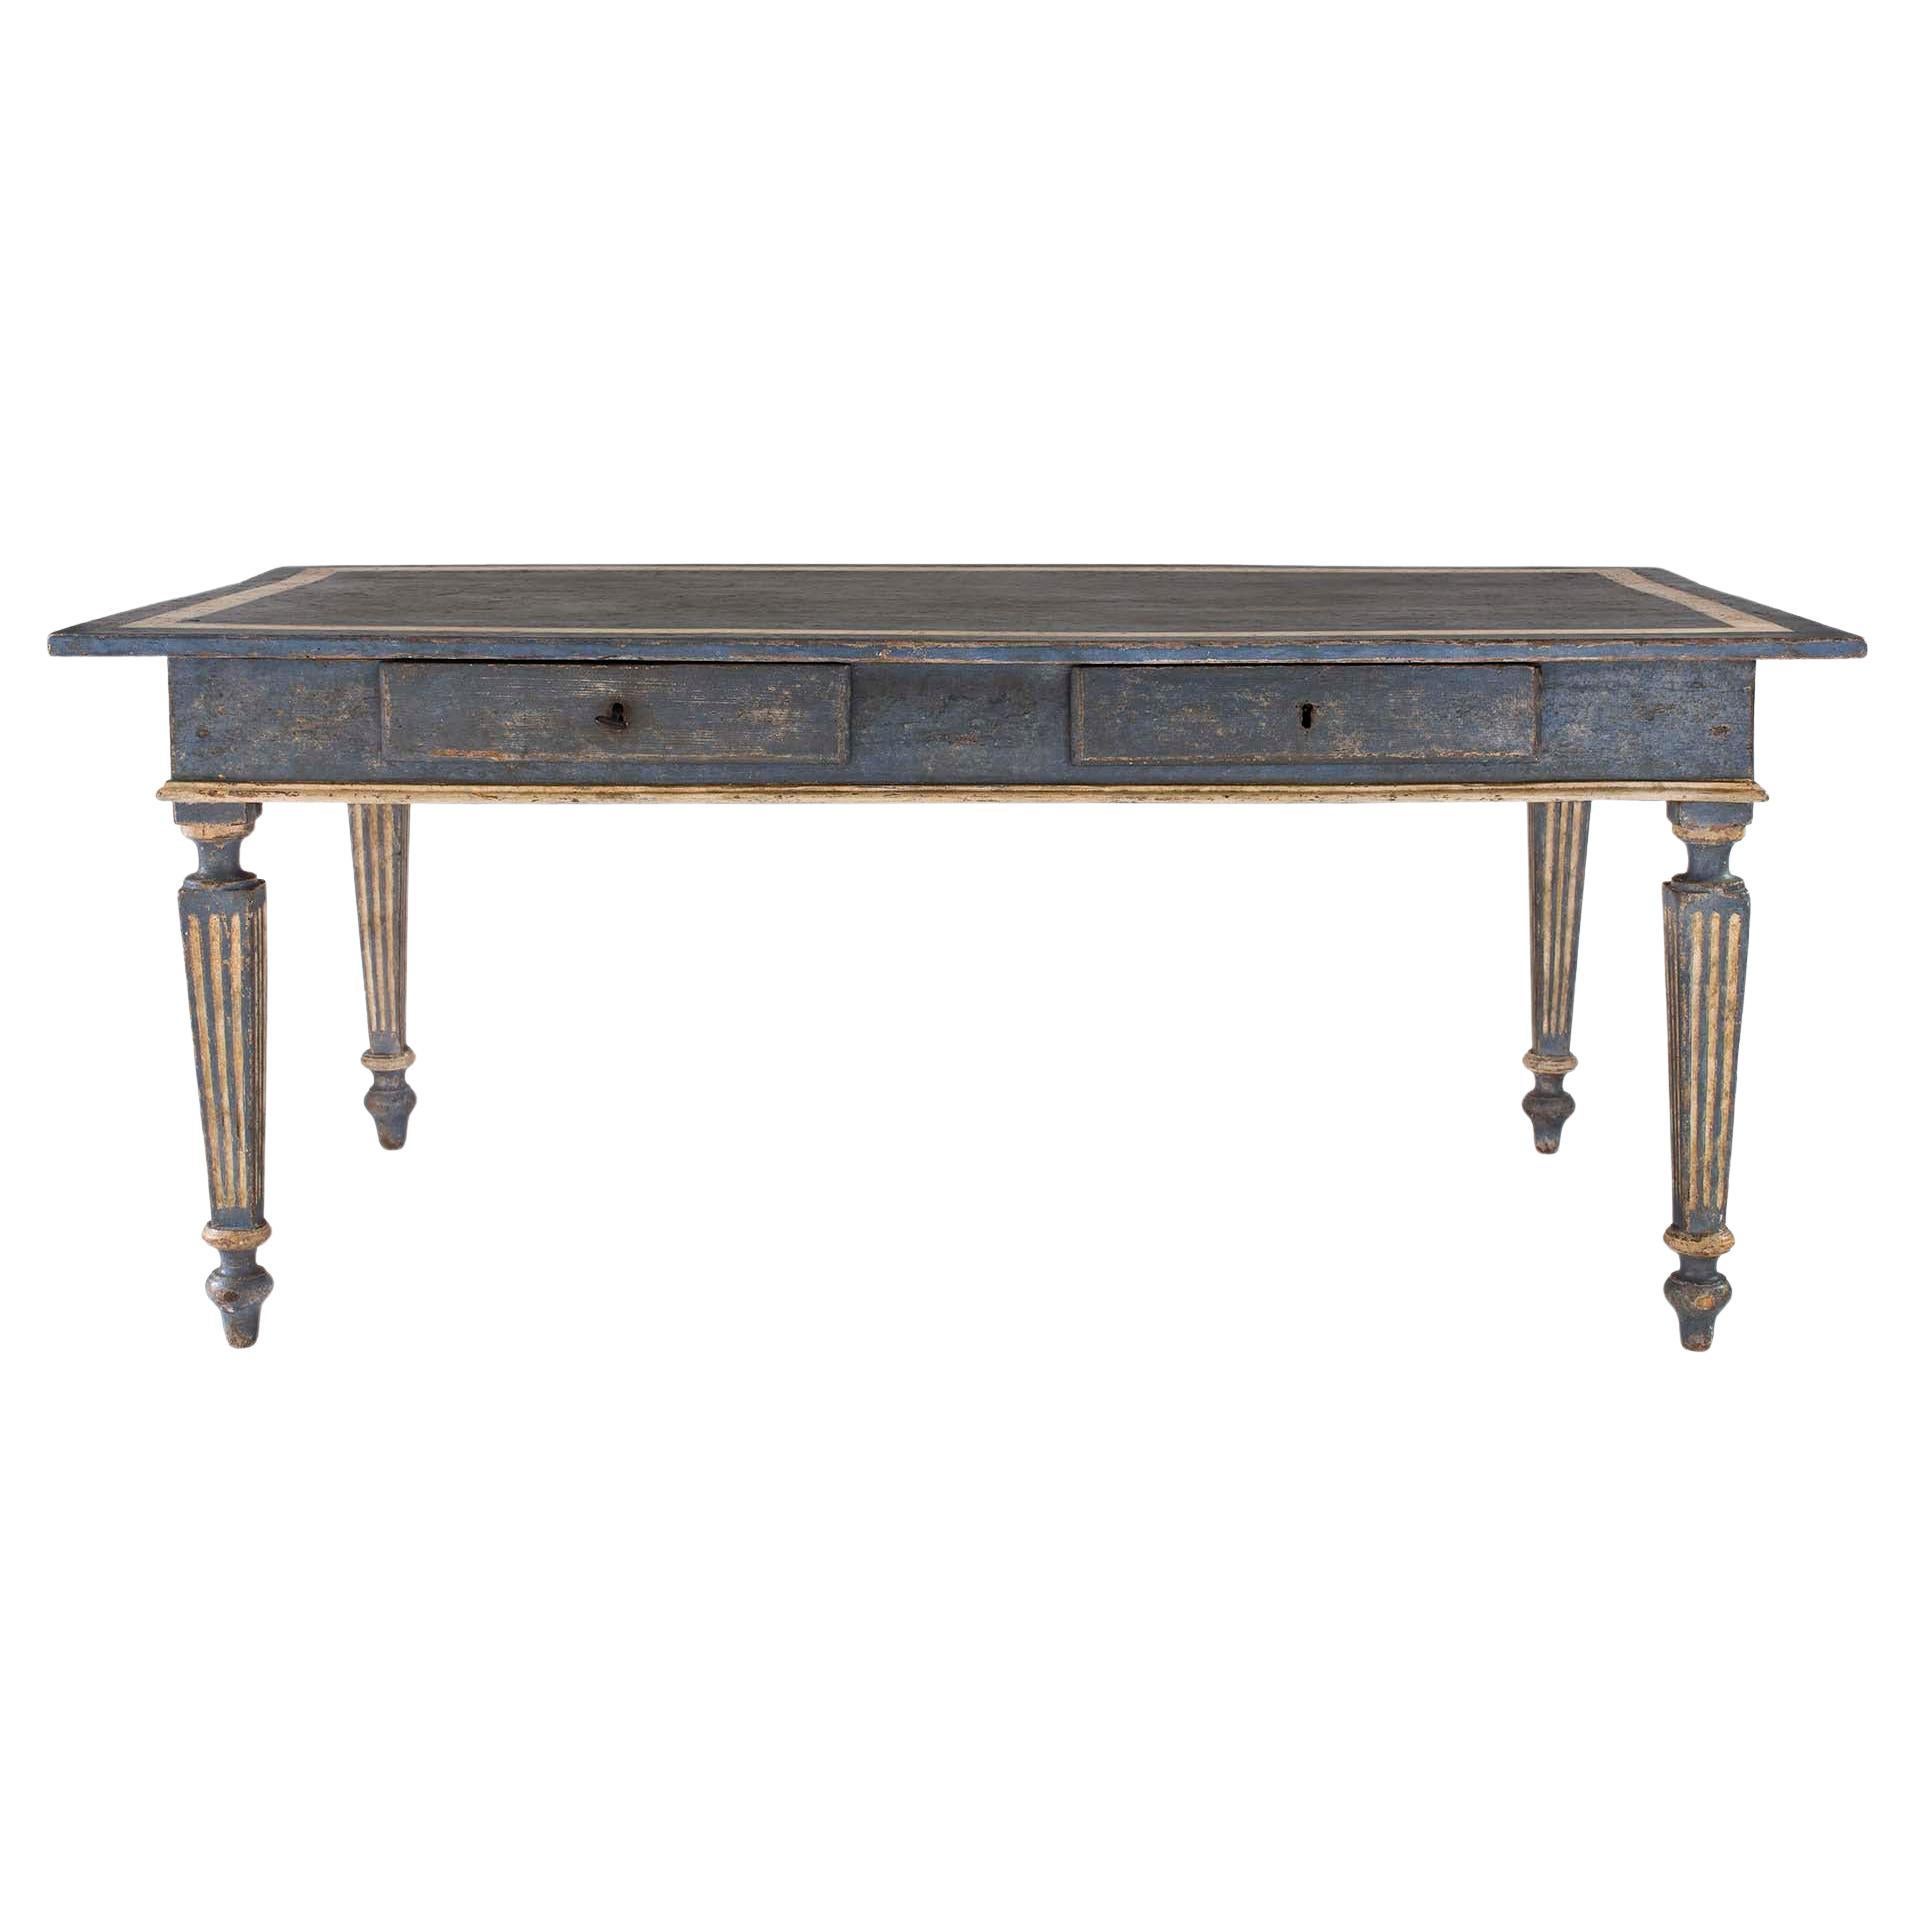 Italian 19th Century Blue Gray and Cream Color Patinated Tuscan Center Table